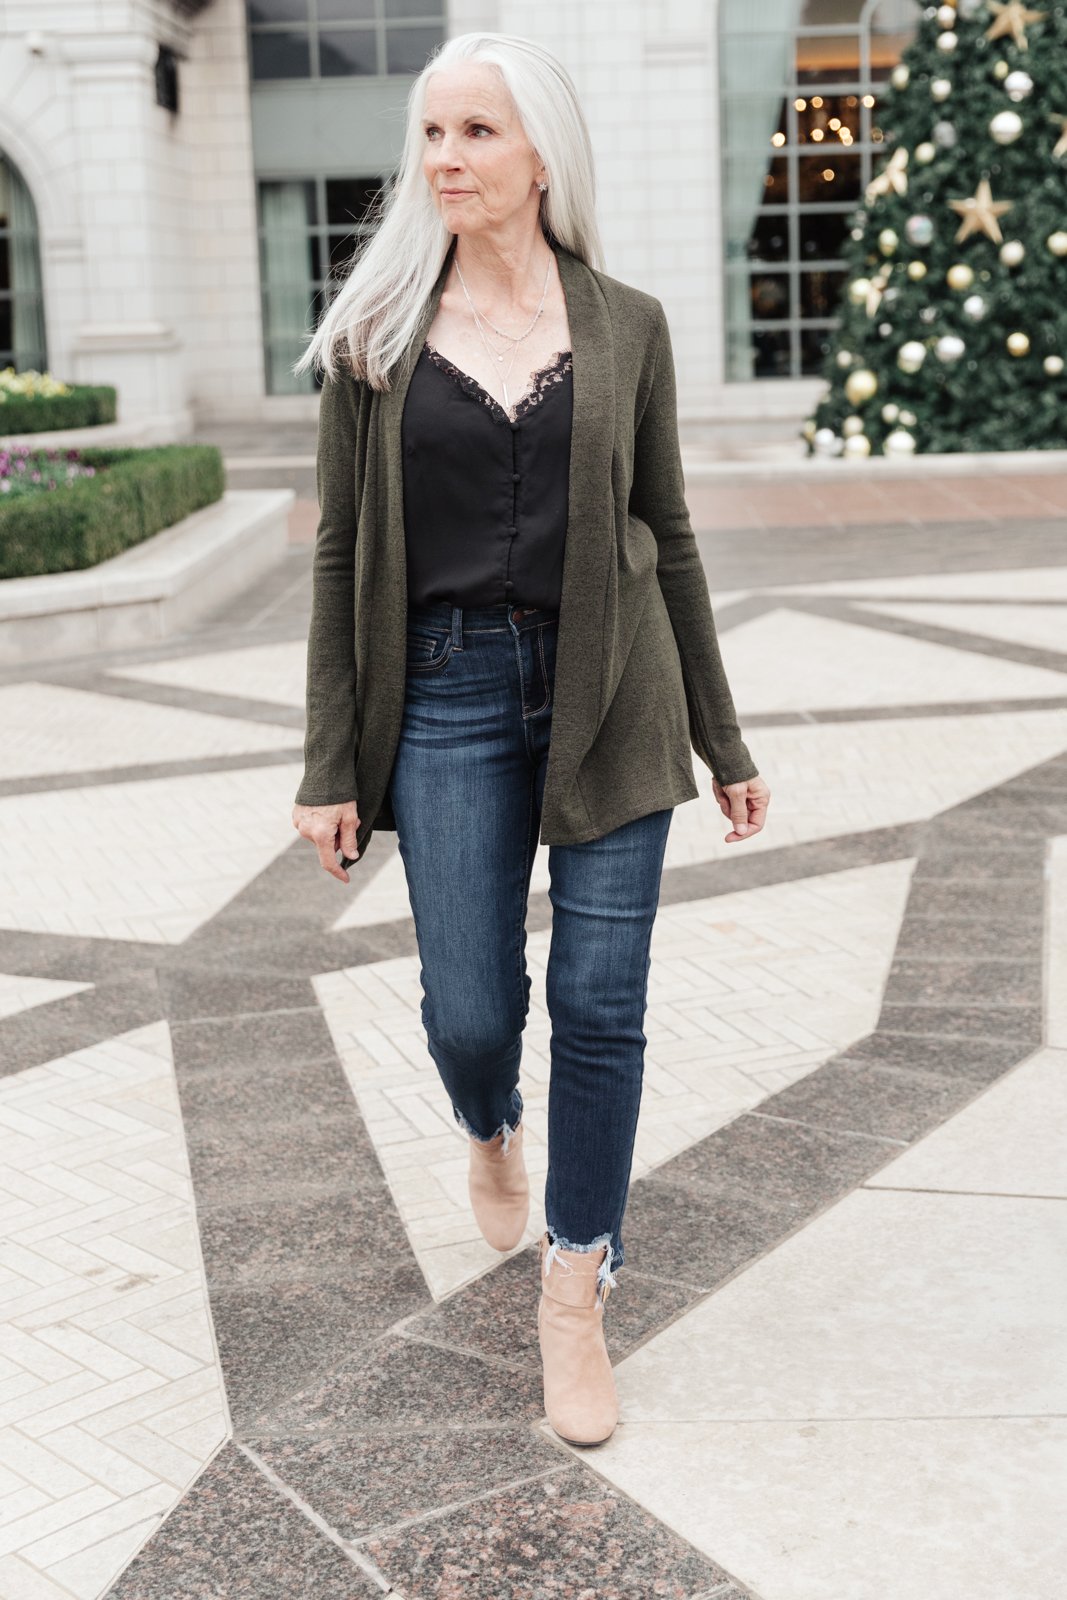 DOORBUSTER Sienna Sweater knit Cardigan In Olive